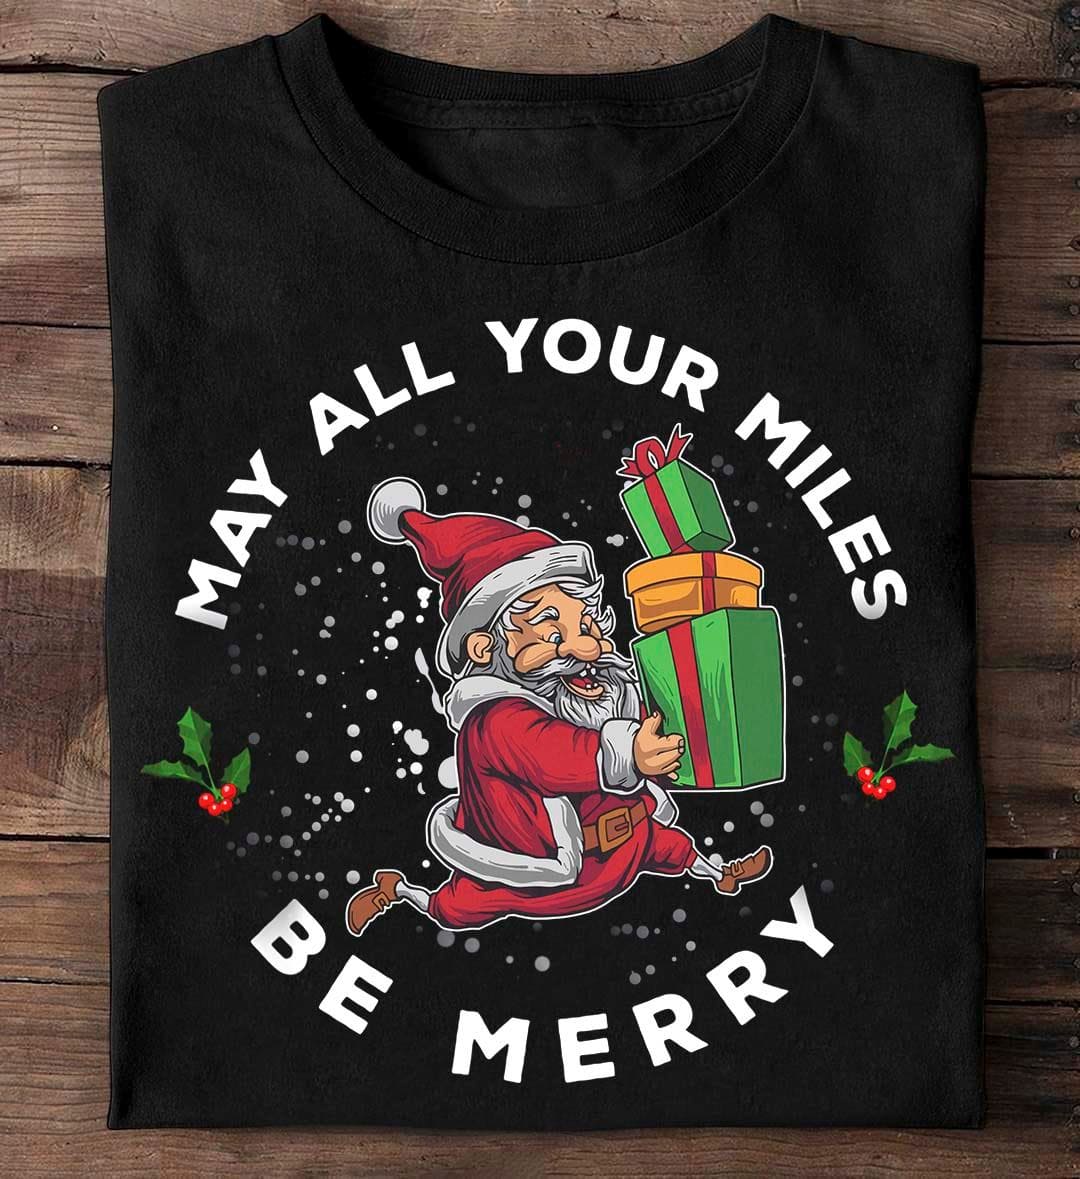 May all your miles be merry - Funny Santa Claus Christmas Gift